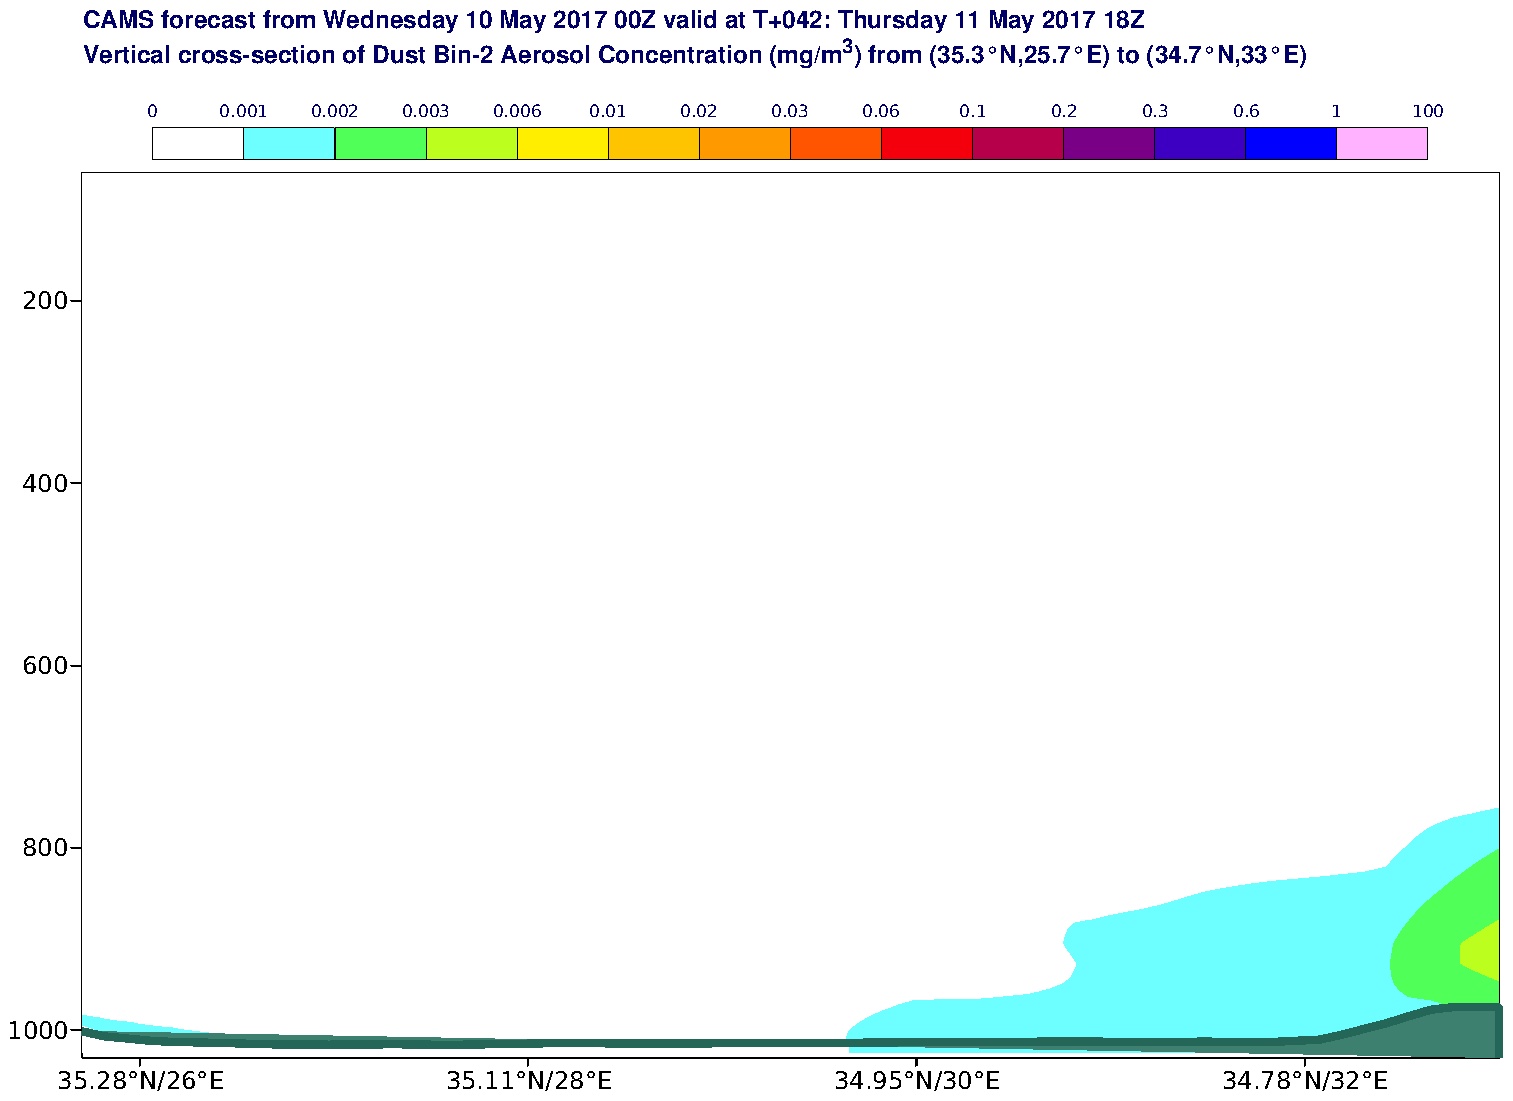 Vertical cross-section of Dust Bin-2 Aerosol Concentration (mg/m3) valid at T42 - 2017-05-11 18:00